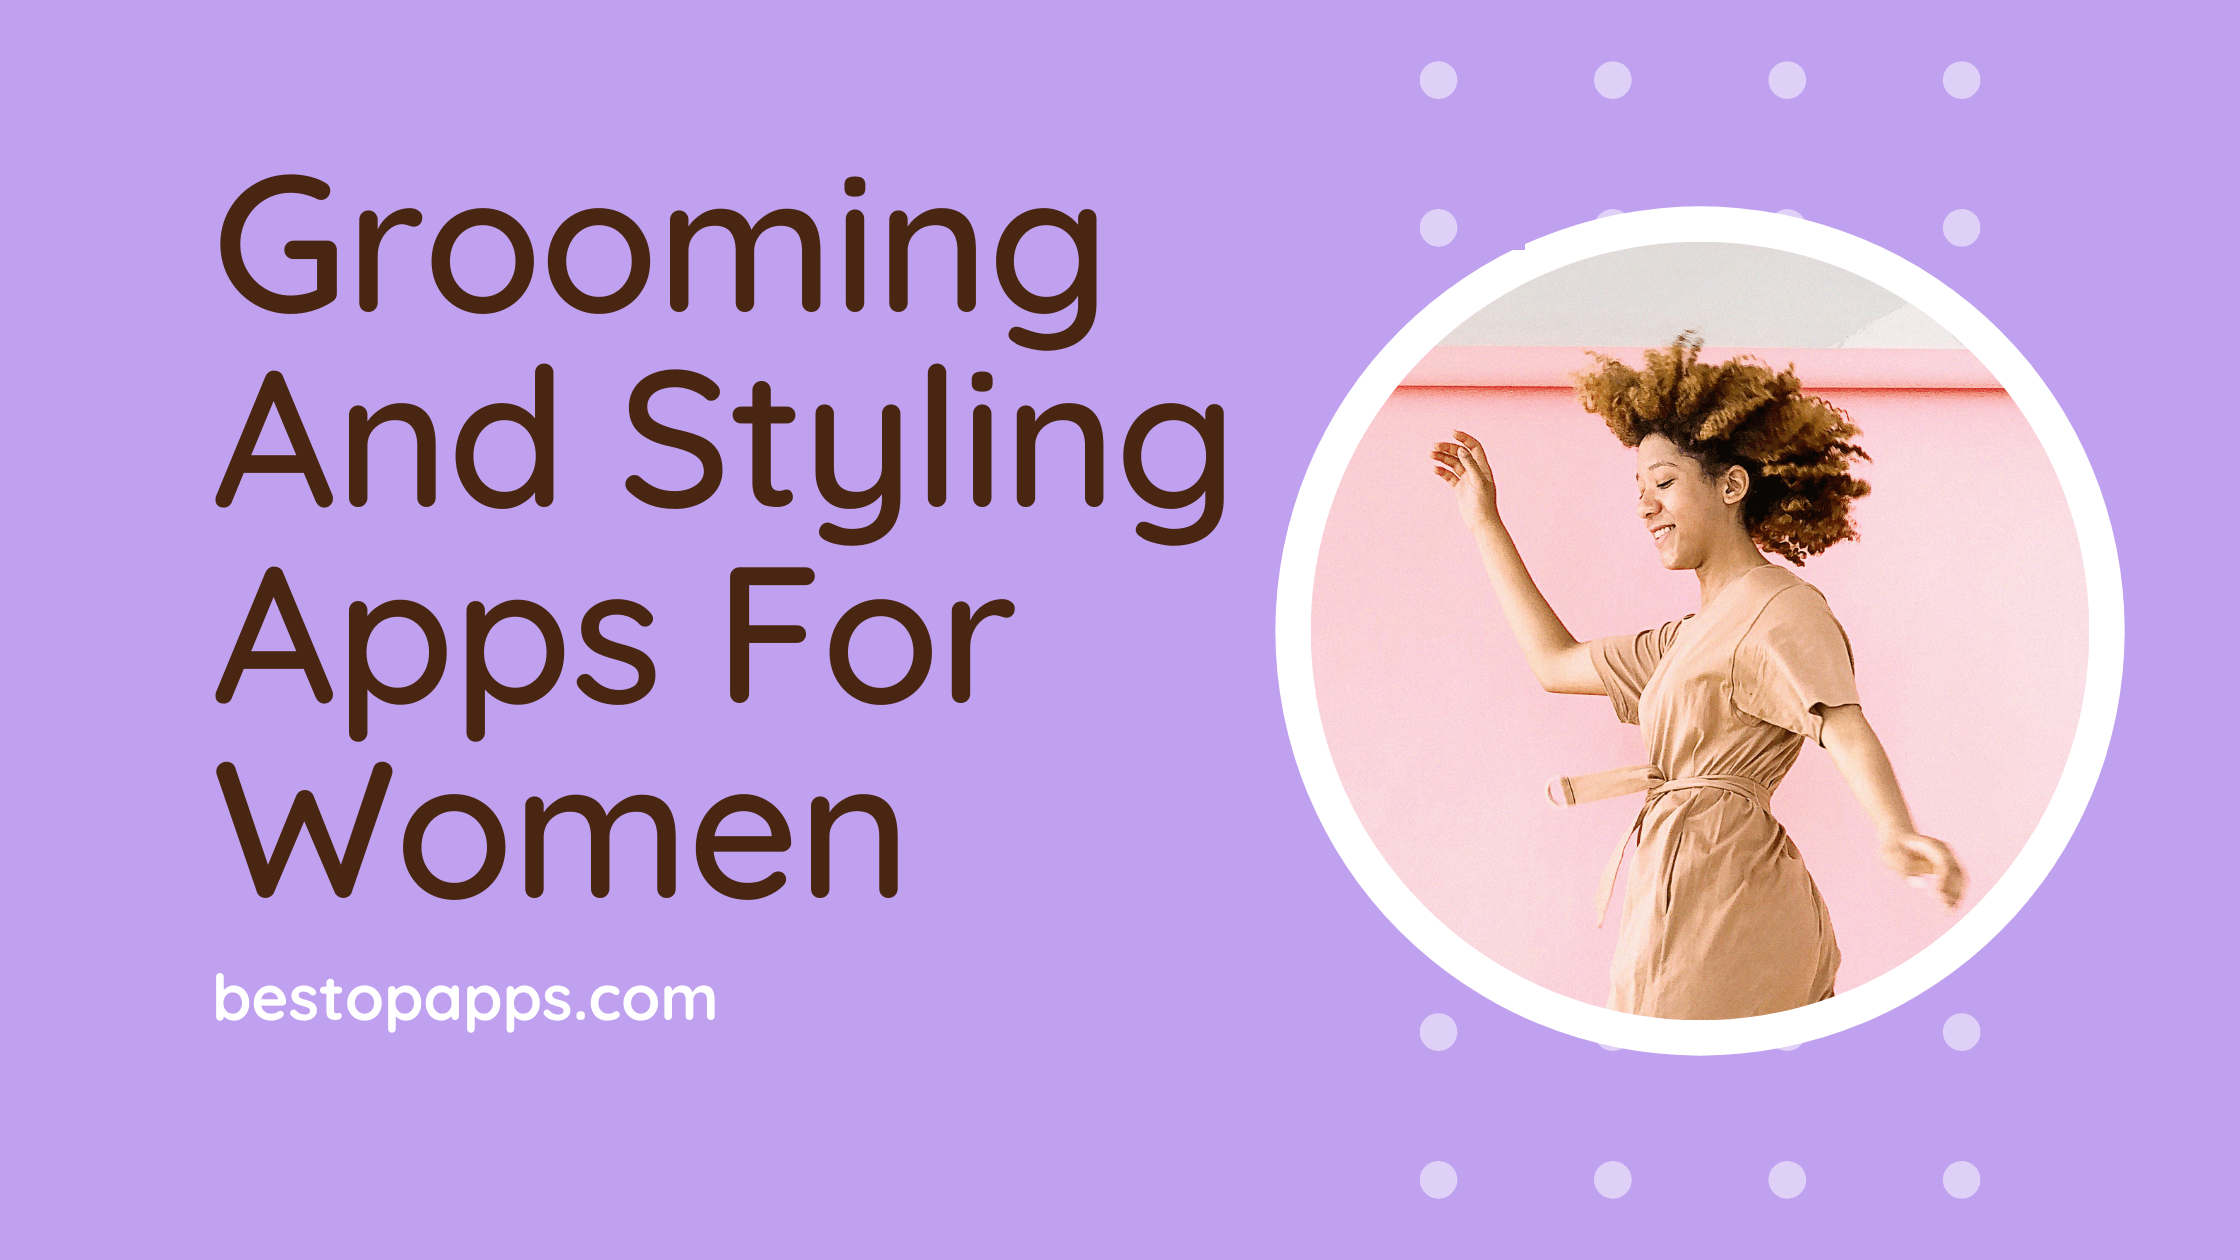 Grooming And Styling Apps For Women